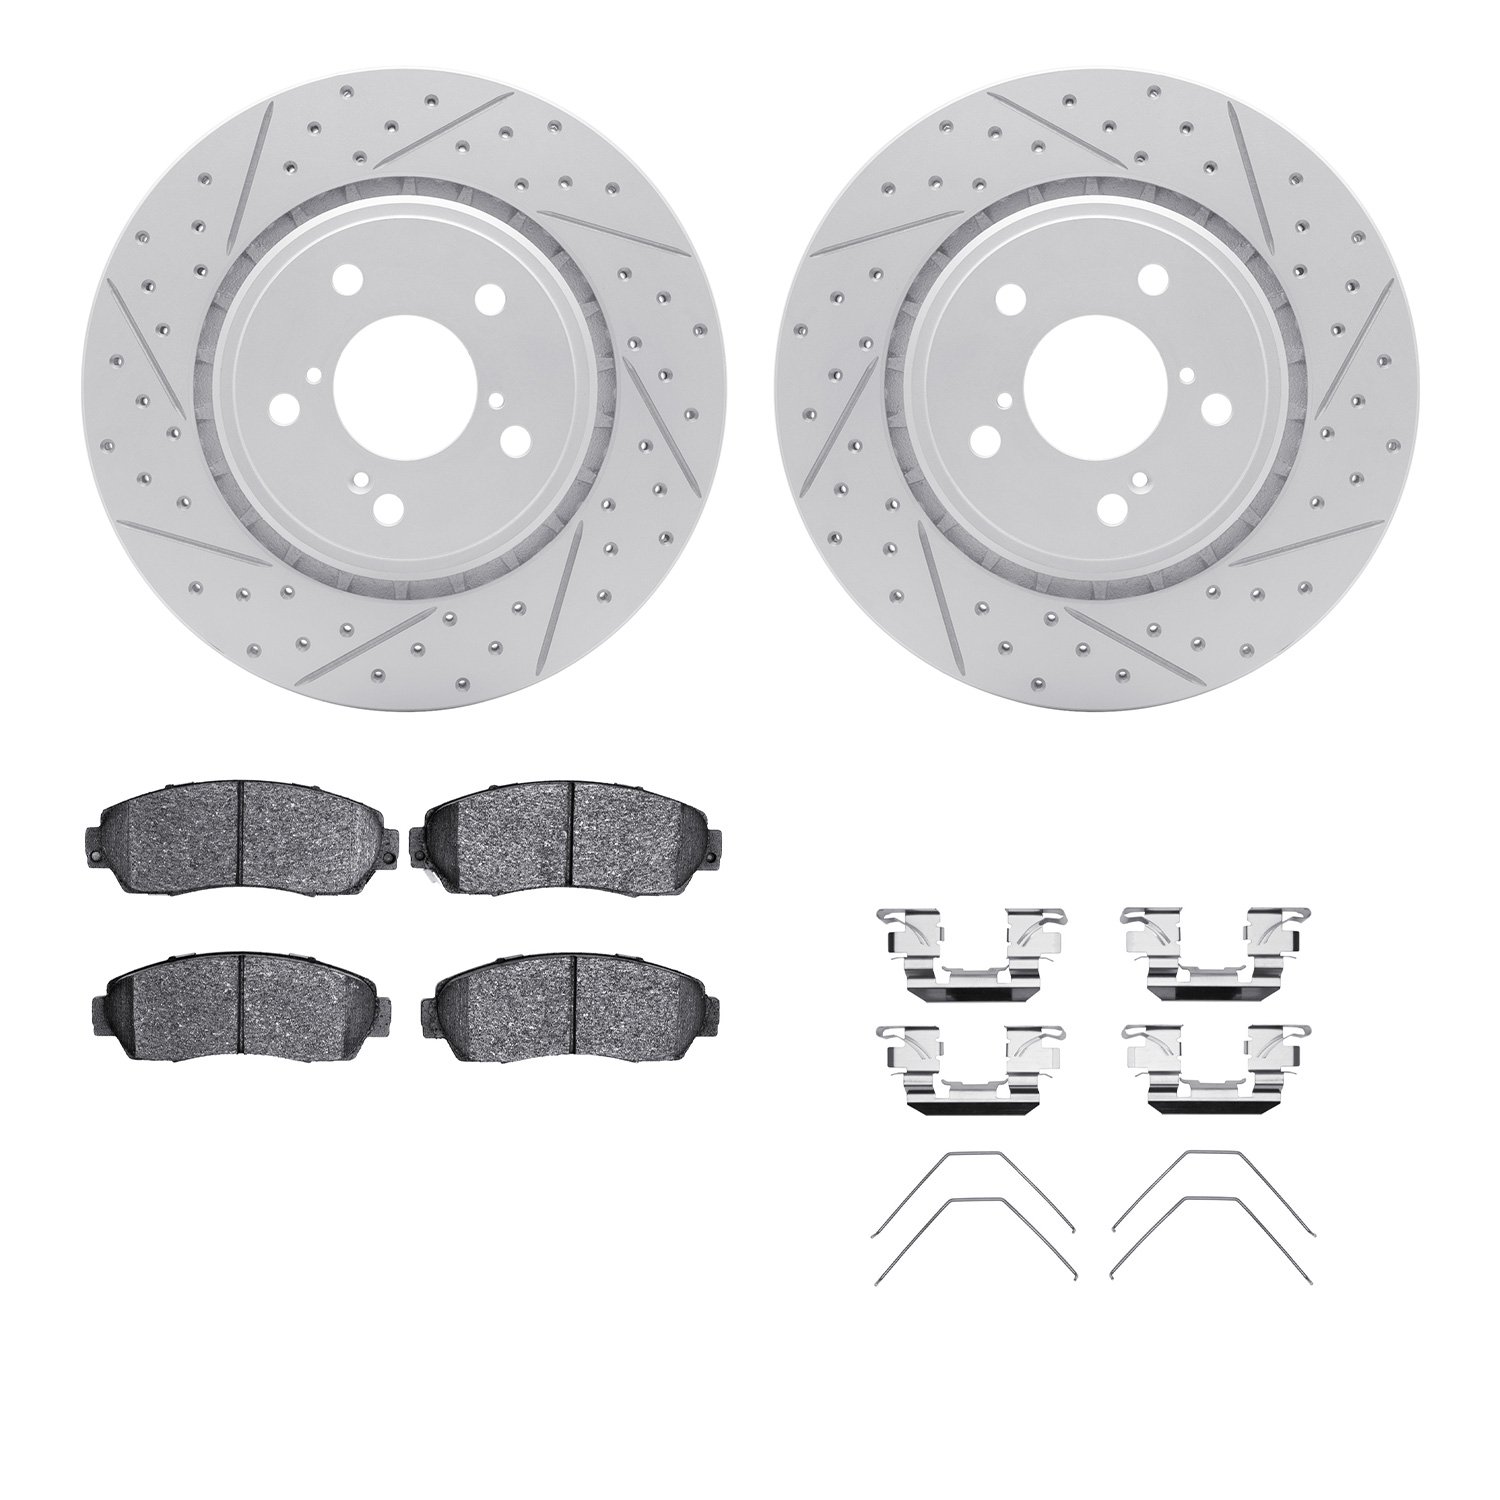 2512-59081 Geoperformance Drilled/Slotted Rotors w/5000 Advanced Brake Pads Kit & Hardware, Fits Select Acura/Honda, Position: F